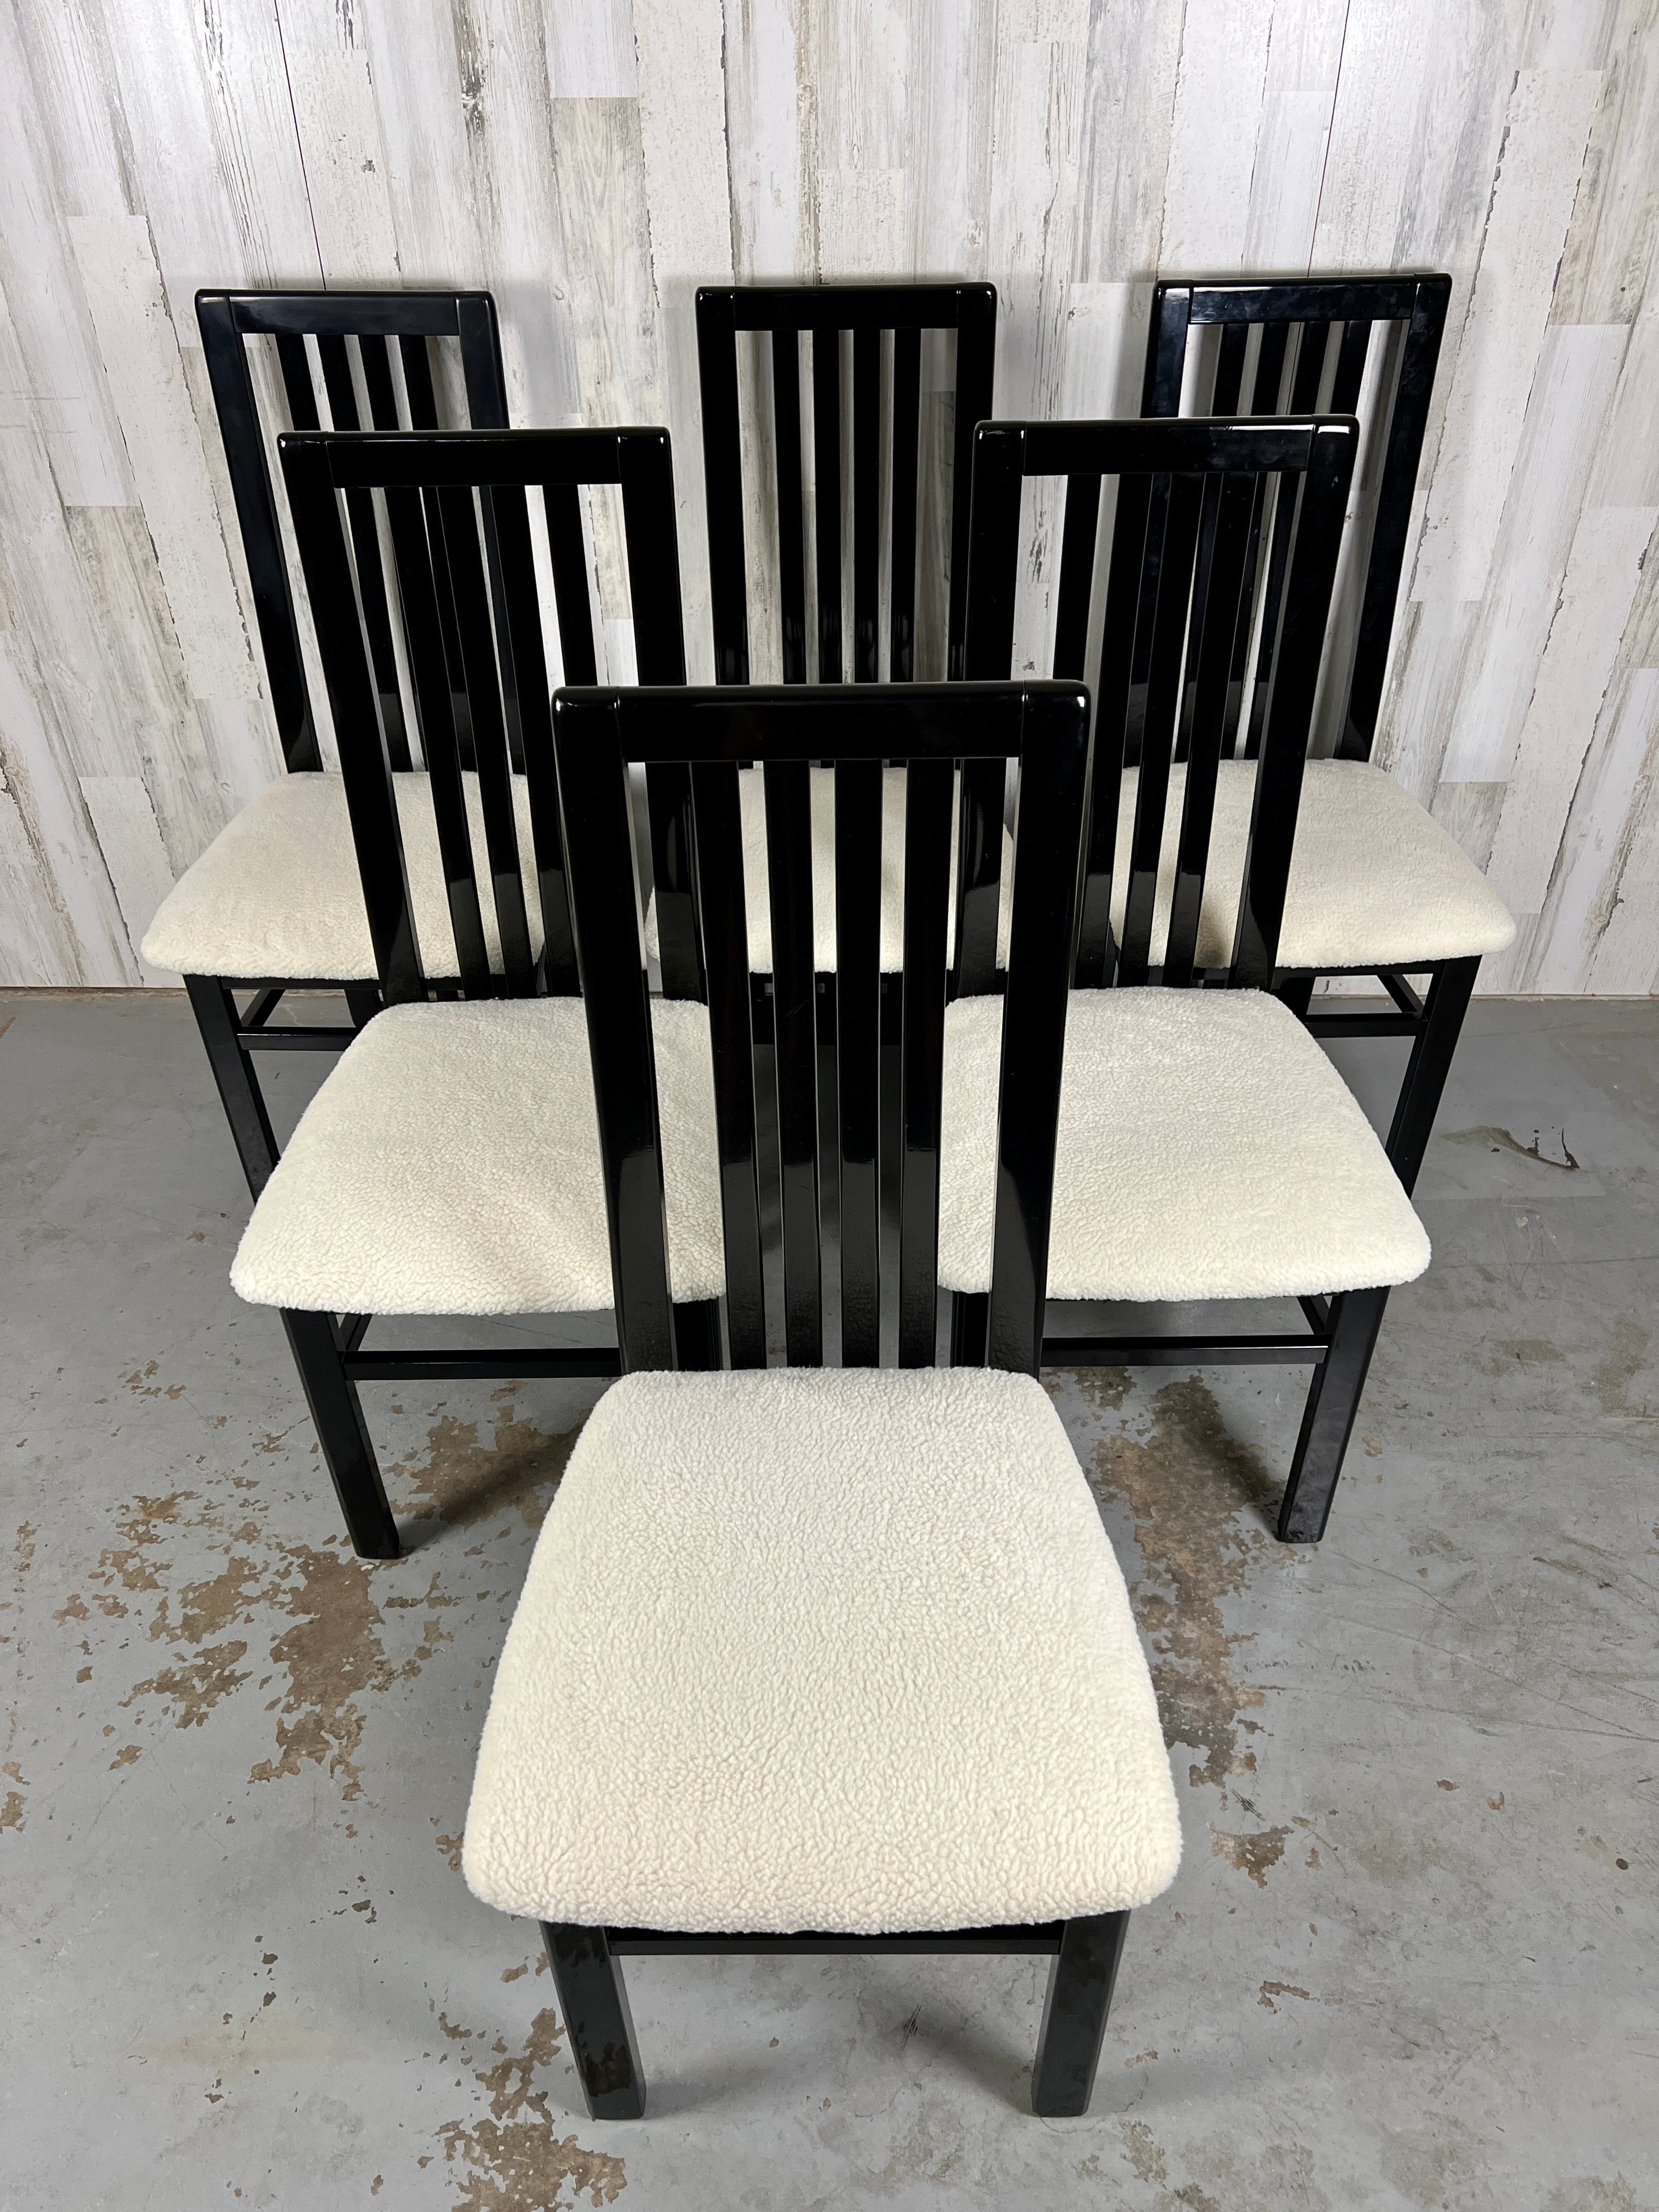 Italian black lacquer dining chairs by S.P.A Tonon. High back curved chairs with a new fuzzy ivory Sherpa fabric on the seats.